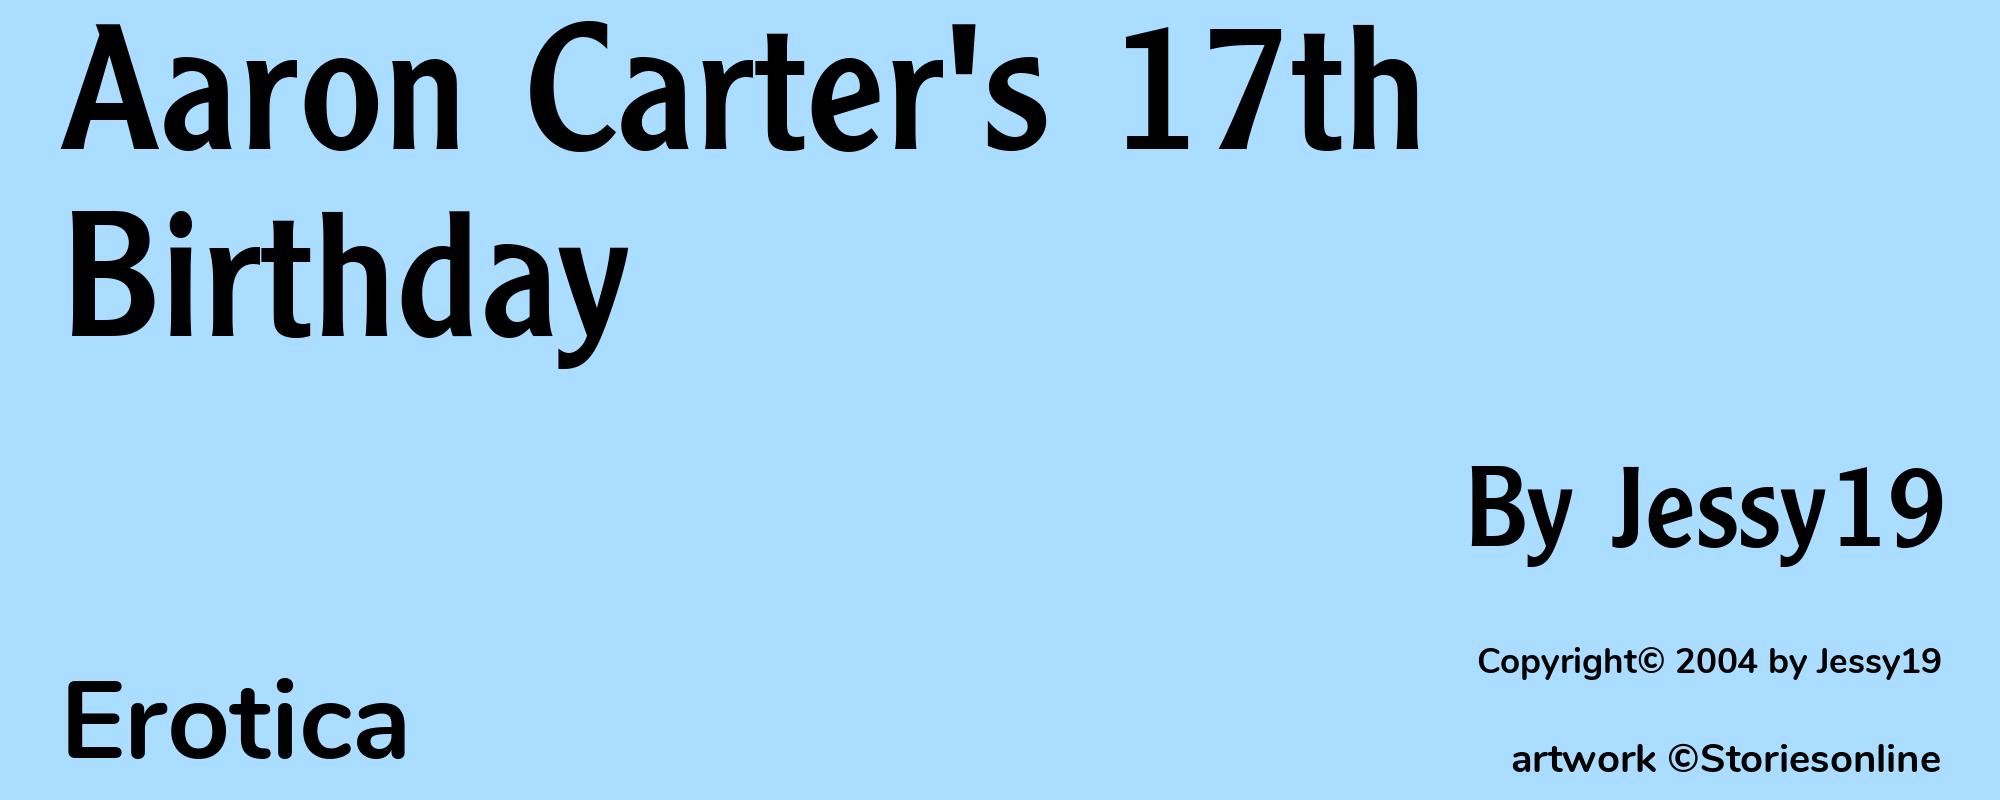 Aaron Carter's 17th Birthday - Cover